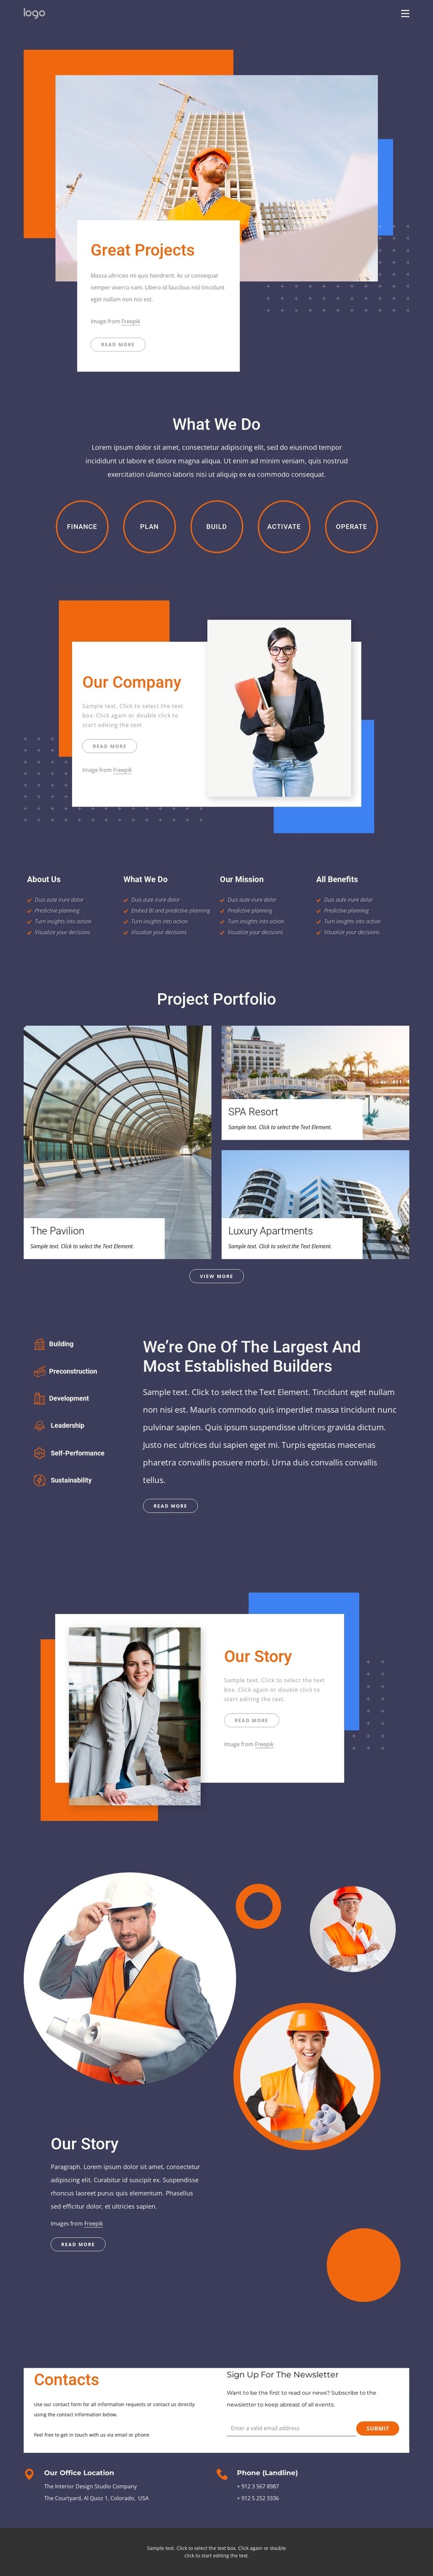 We specialise in delivering large complex building projects HTML5 Template